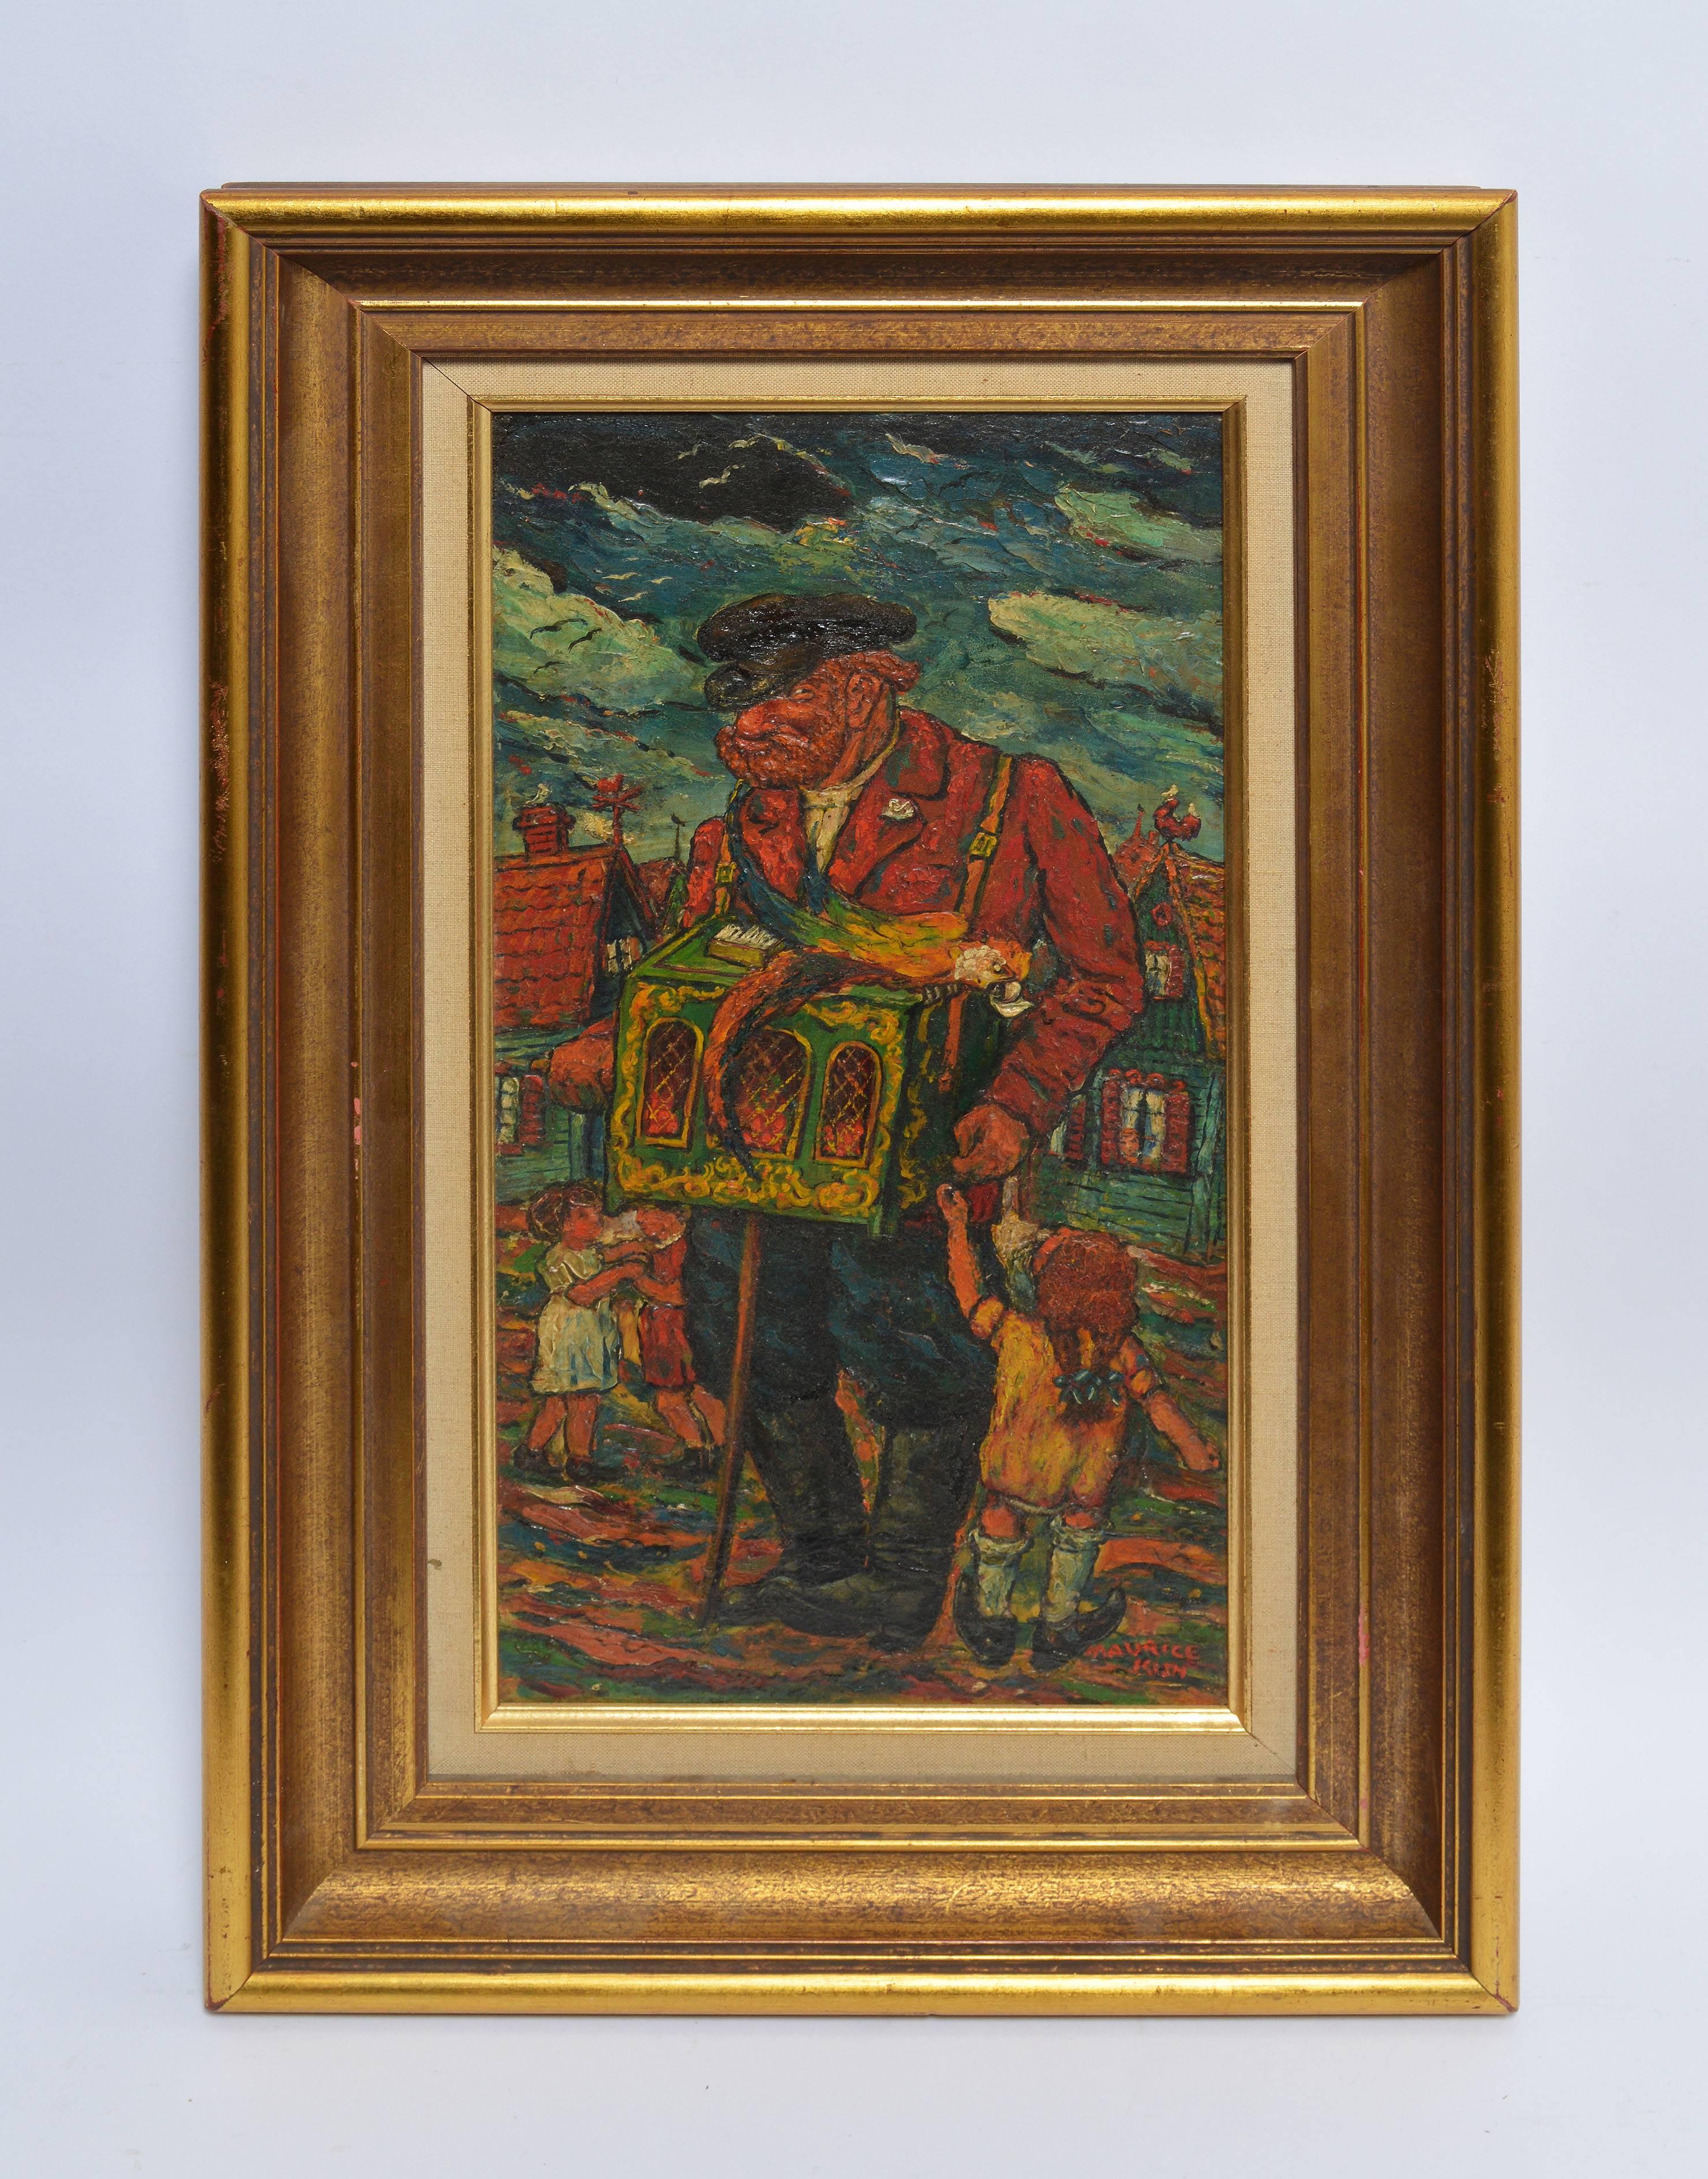 Vintage New York Street Scene with Children - Painting by Maurice Kish